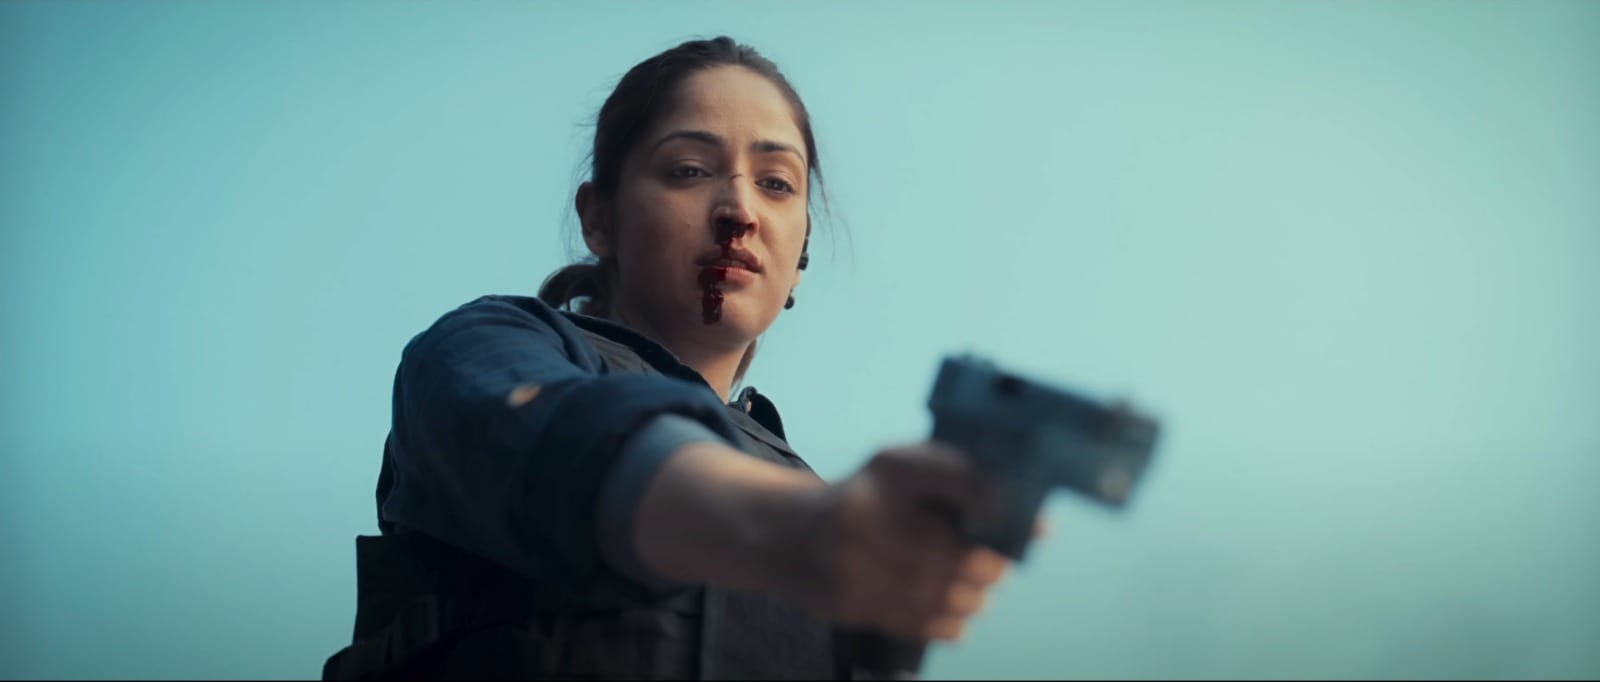 The movie “Article 370,” featuring Yami Gautam’s powerful performance, action-packed scenes, and thrilling suspense, will hit the screens on this date!